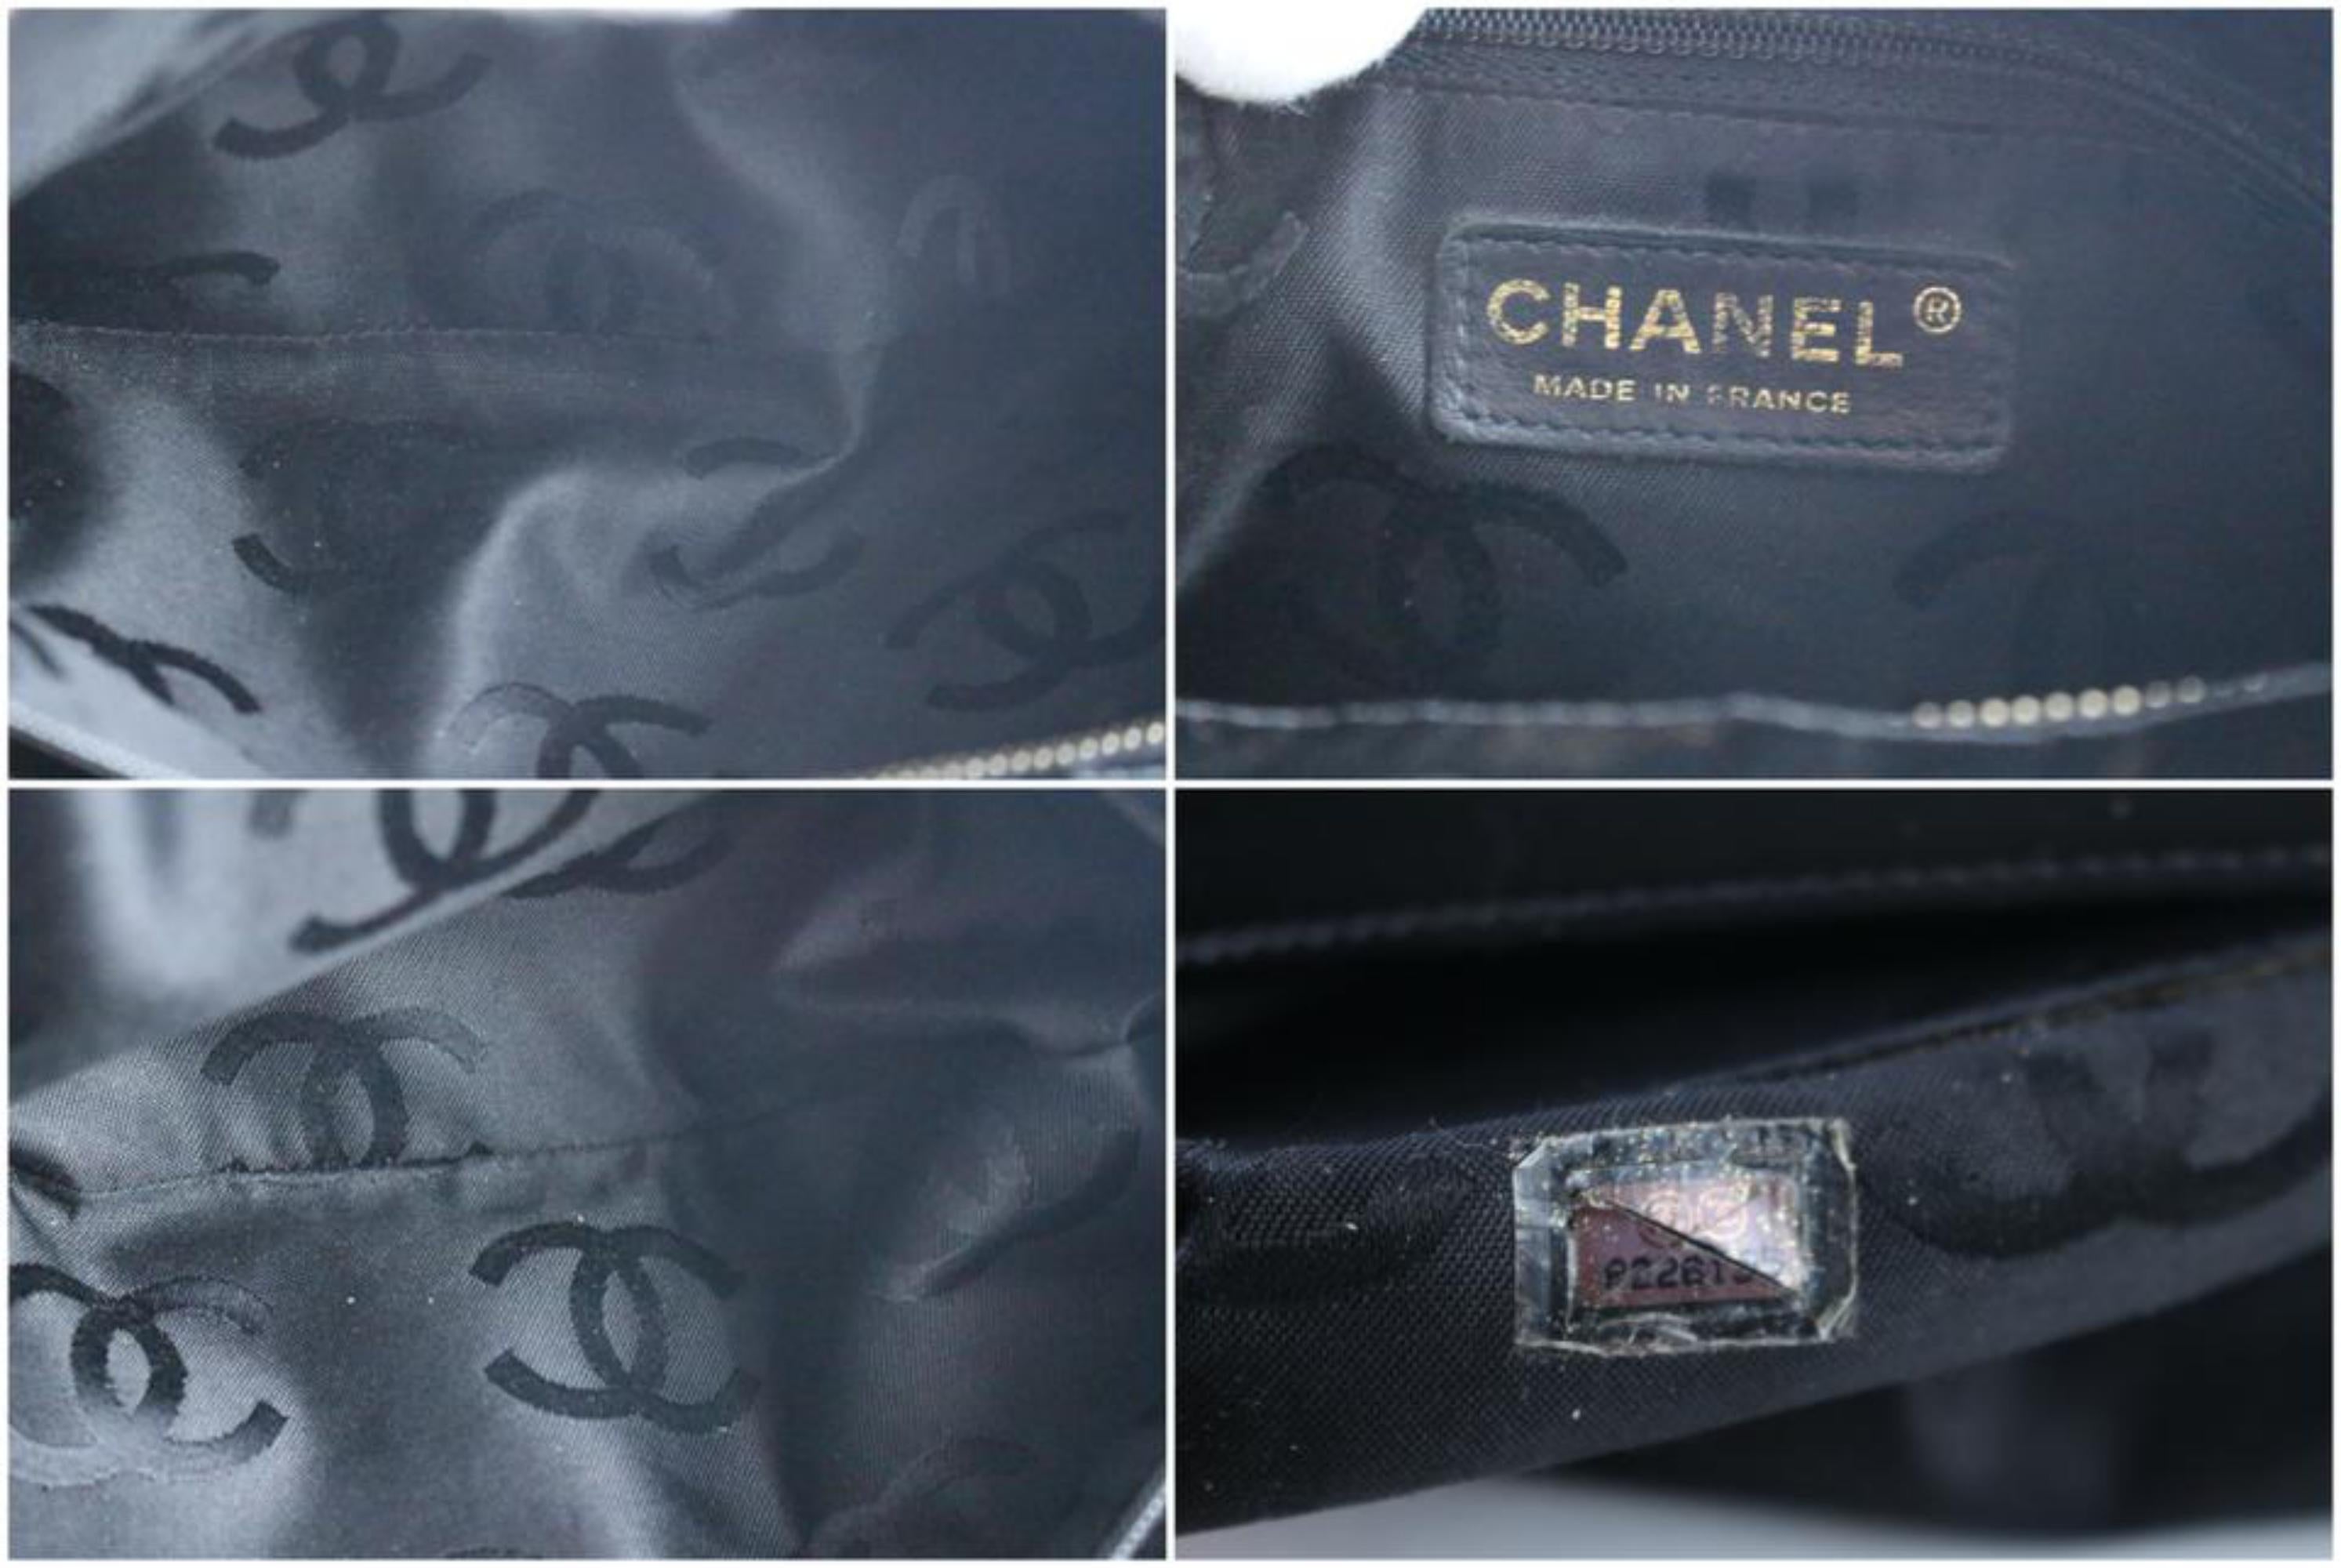 Chanel Hobo Embossed Camellia 7cr0326 Black Patent Leather Shoulder Bag In Good Condition For Sale In Forest Hills, NY